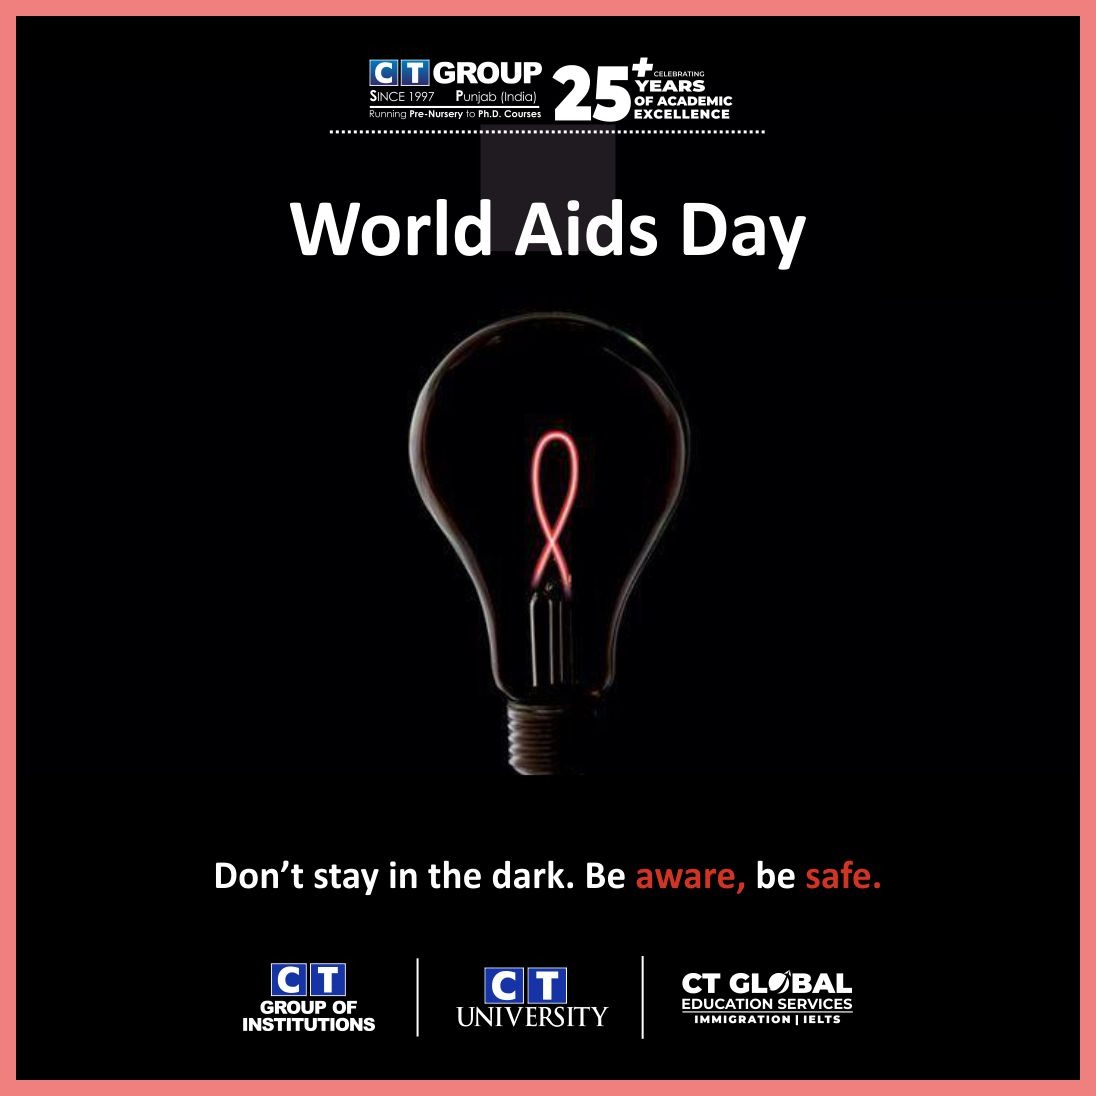 World AIDS Day: Ignite awareness, extinguish ignorance.
Every informed choice is a step towards a healthier world.

#CTGroup #worldaidsday #igniteawareness #endignorance #healthierworld  #aidsawareness #knowyourstatus #endstigma #gettested #supporteachother #shahpur #southcampus